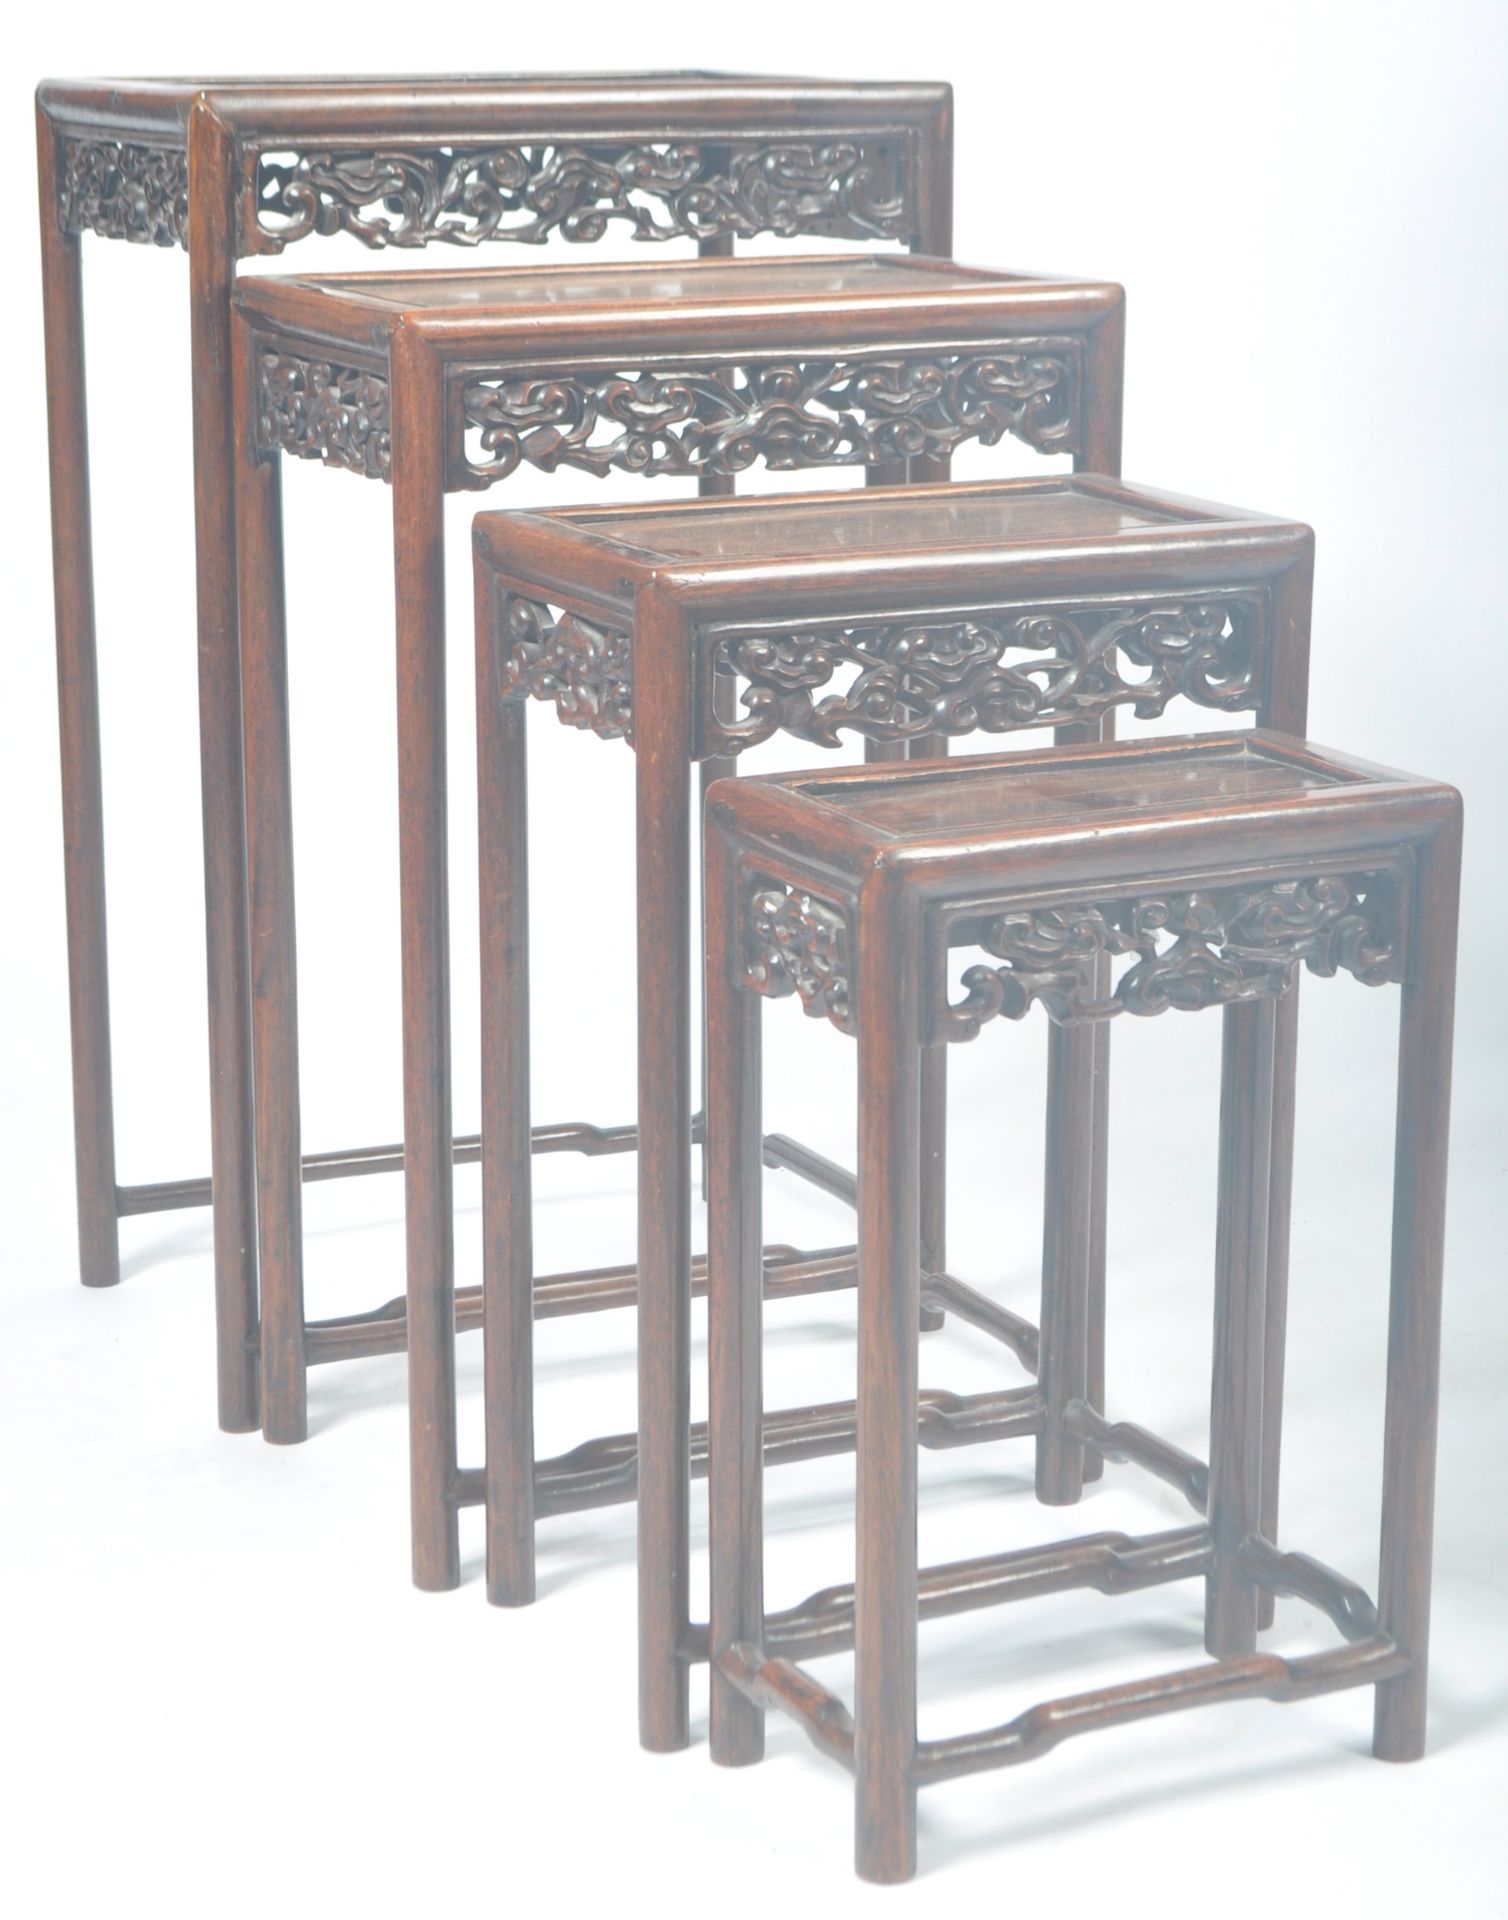 CHINESE ANTIQUE QING DYNASTY QUARTETTO NEST OF TABLES - Image 6 of 6